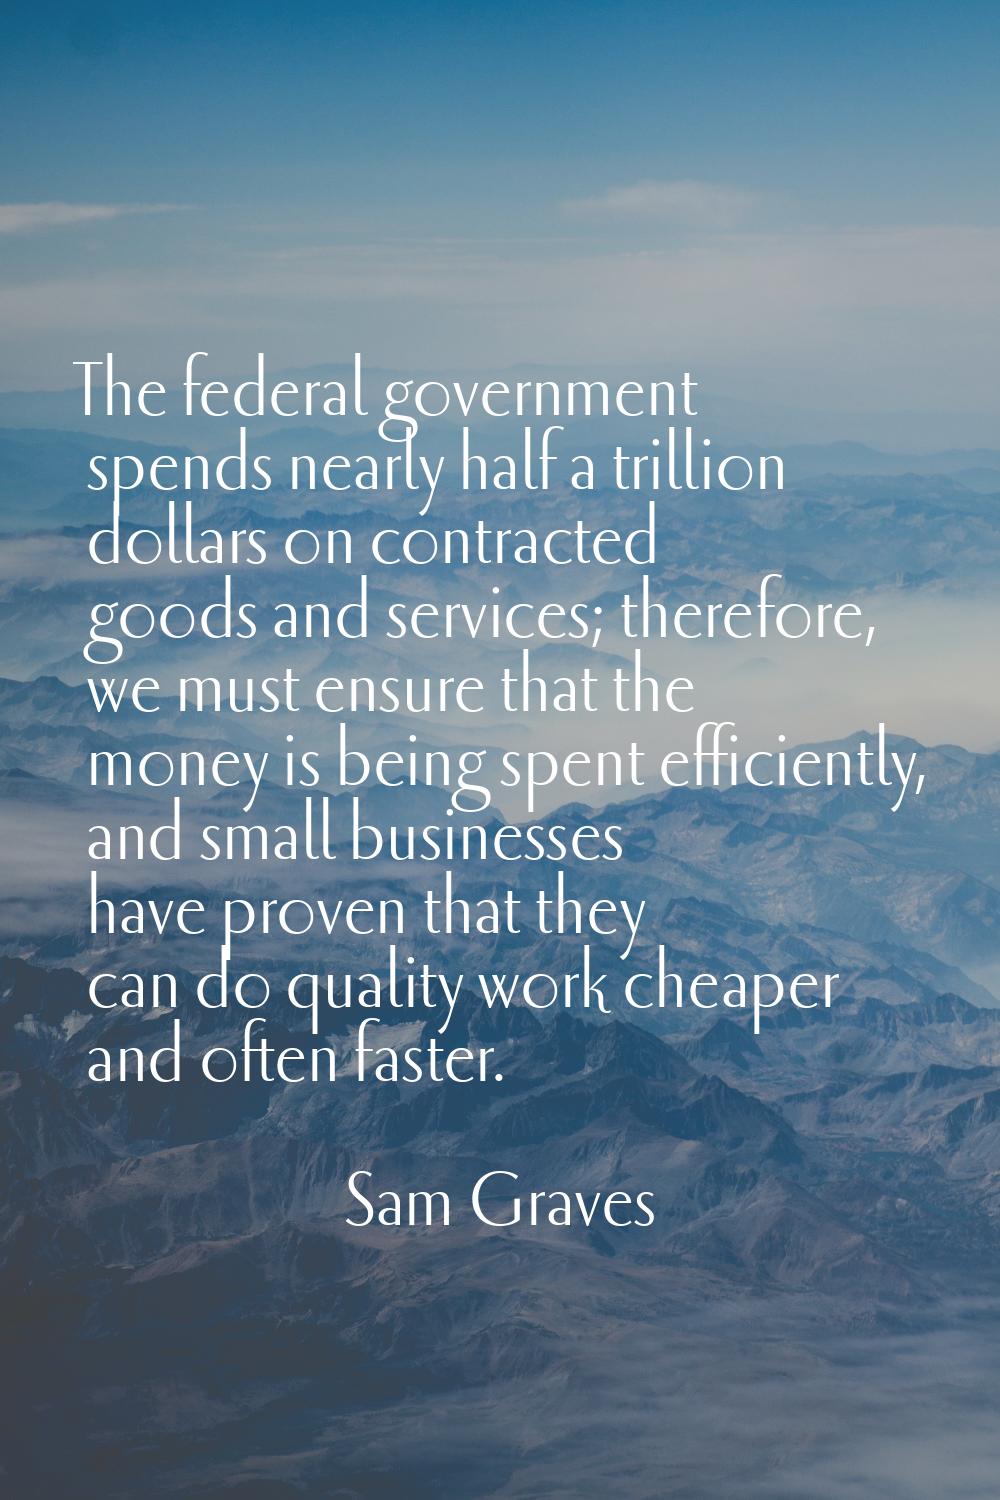 The federal government spends nearly half a trillion dollars on contracted goods and services; ther